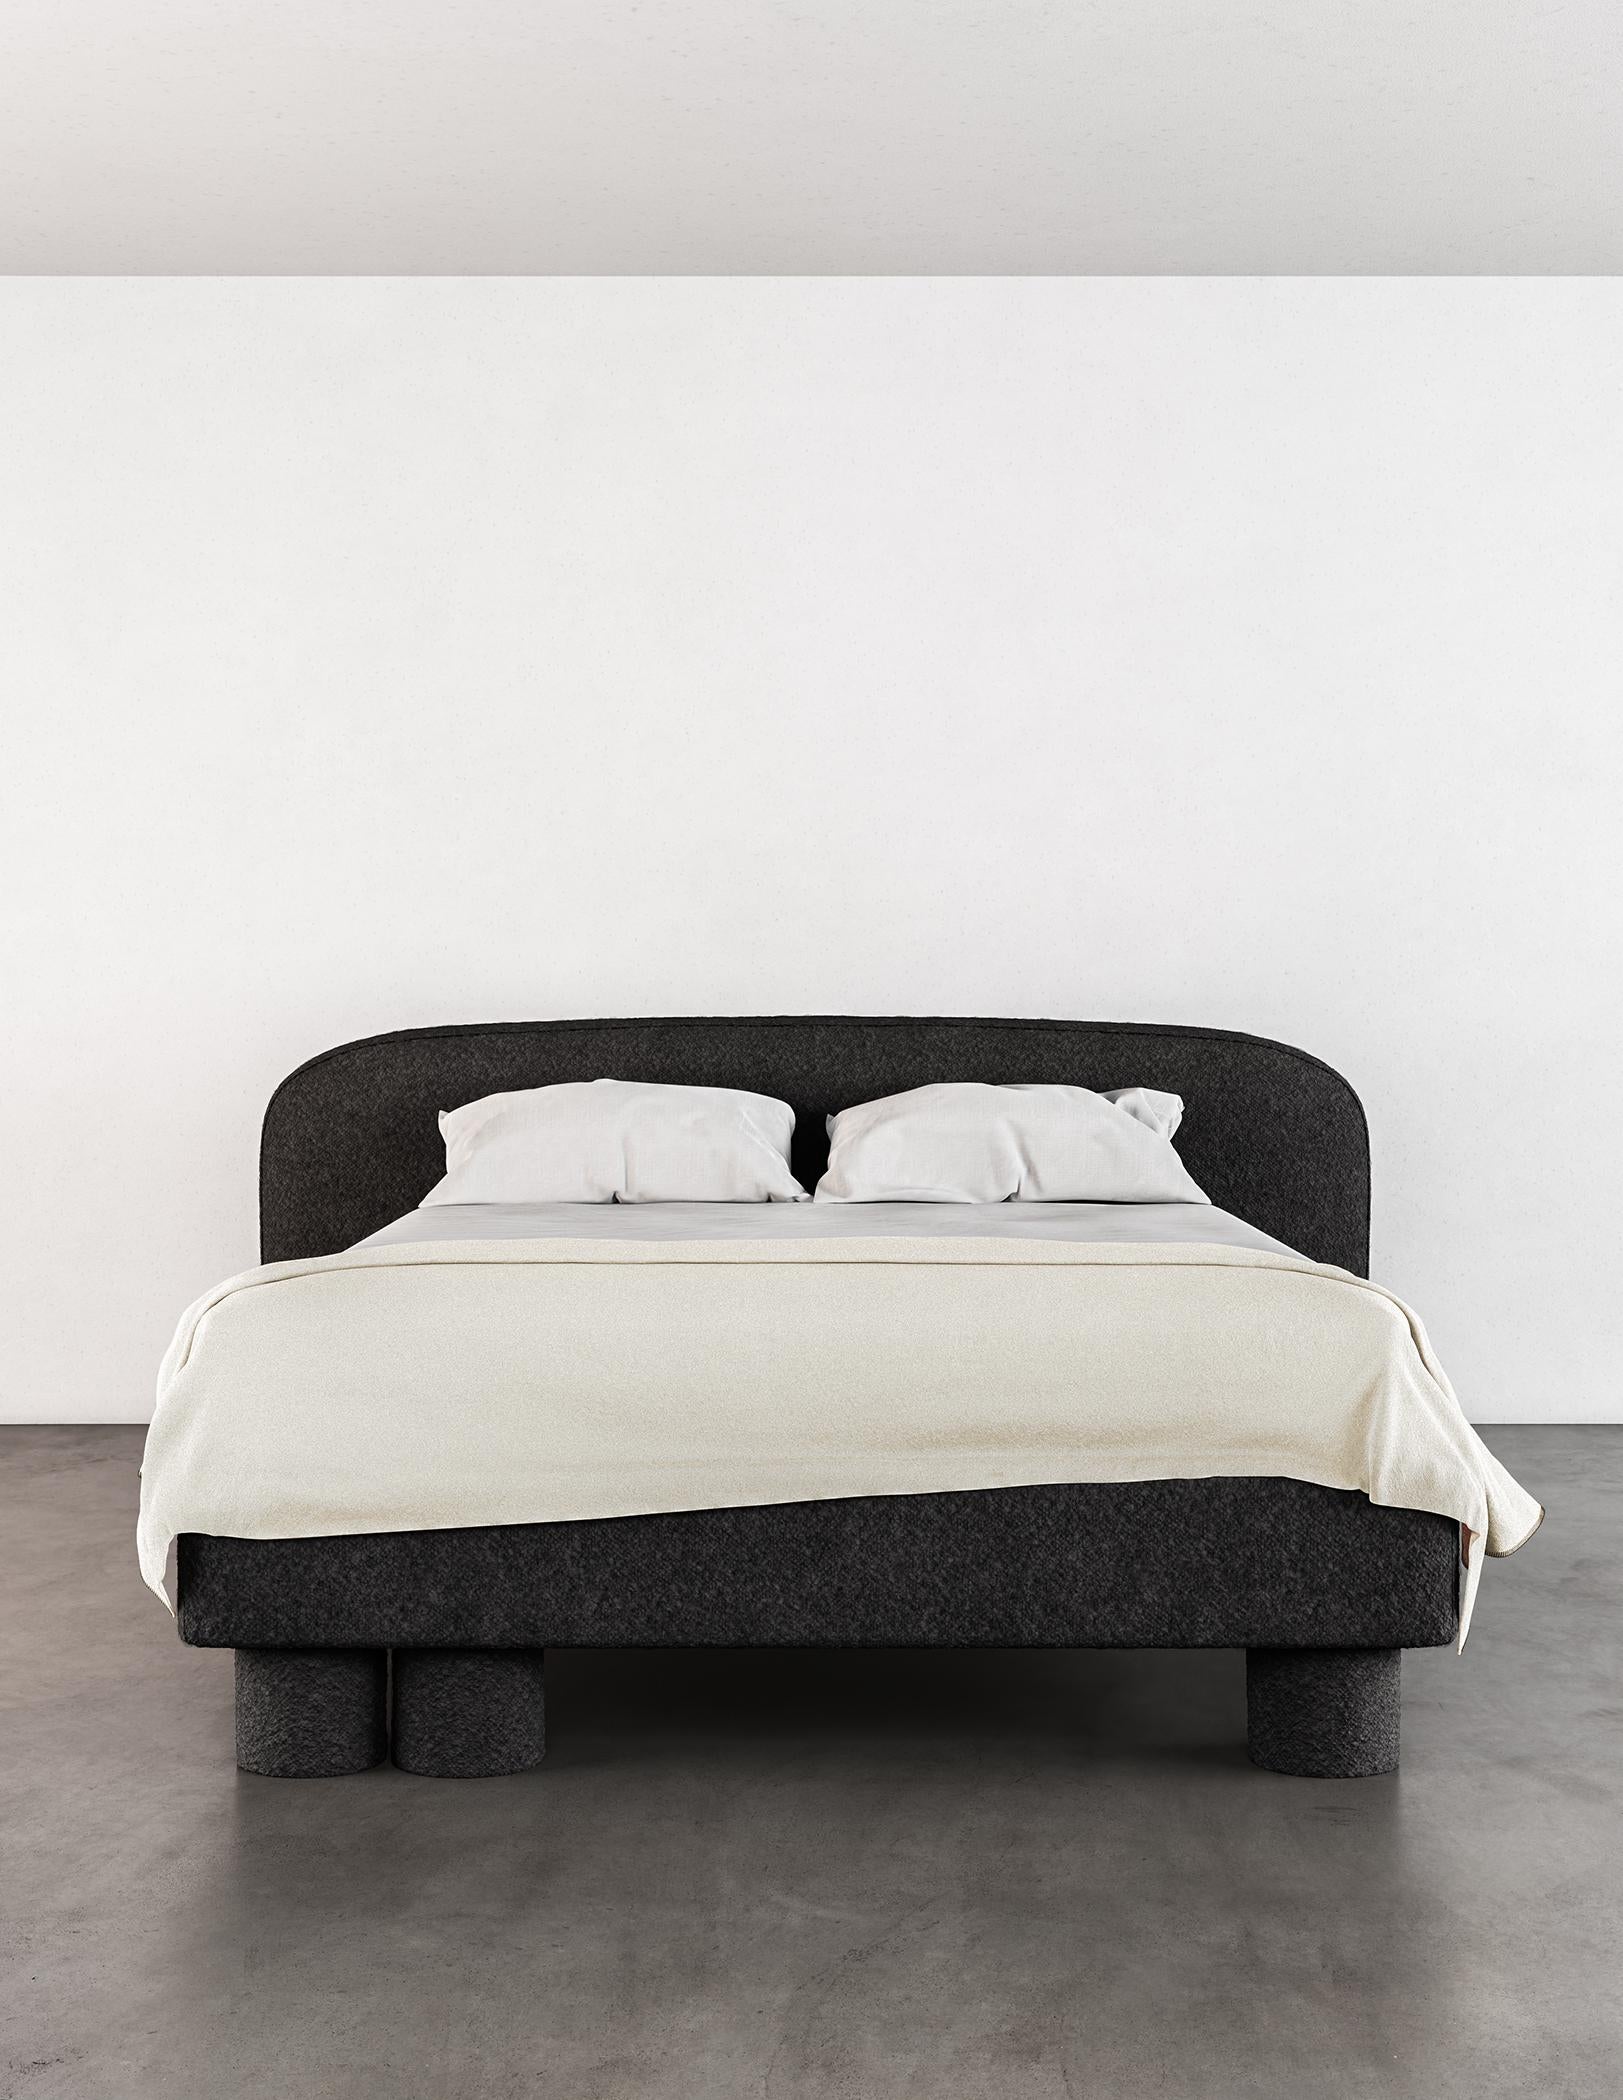 The Pillar Bed is a stunning piece of furniture that boasts a unique and captivating design. It is characterized by layered, asymmetrical design elements that create a sense of sophistication and simplicity. The deliberate imbalance in these design